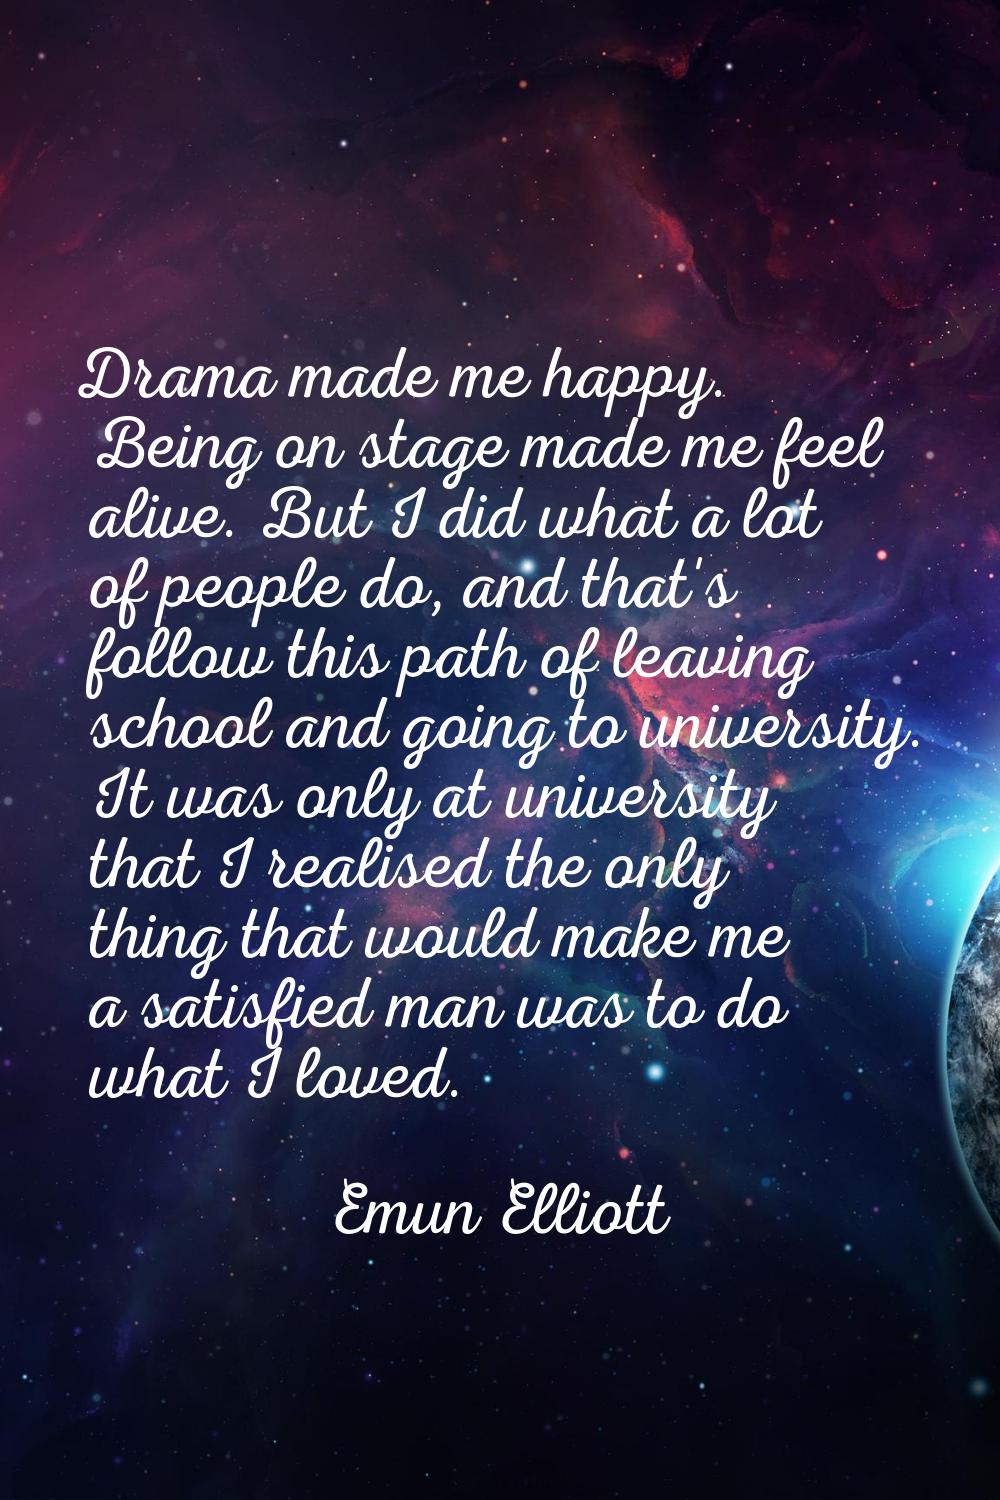 Drama made me happy. Being on stage made me feel alive. But I did what a lot of people do, and that